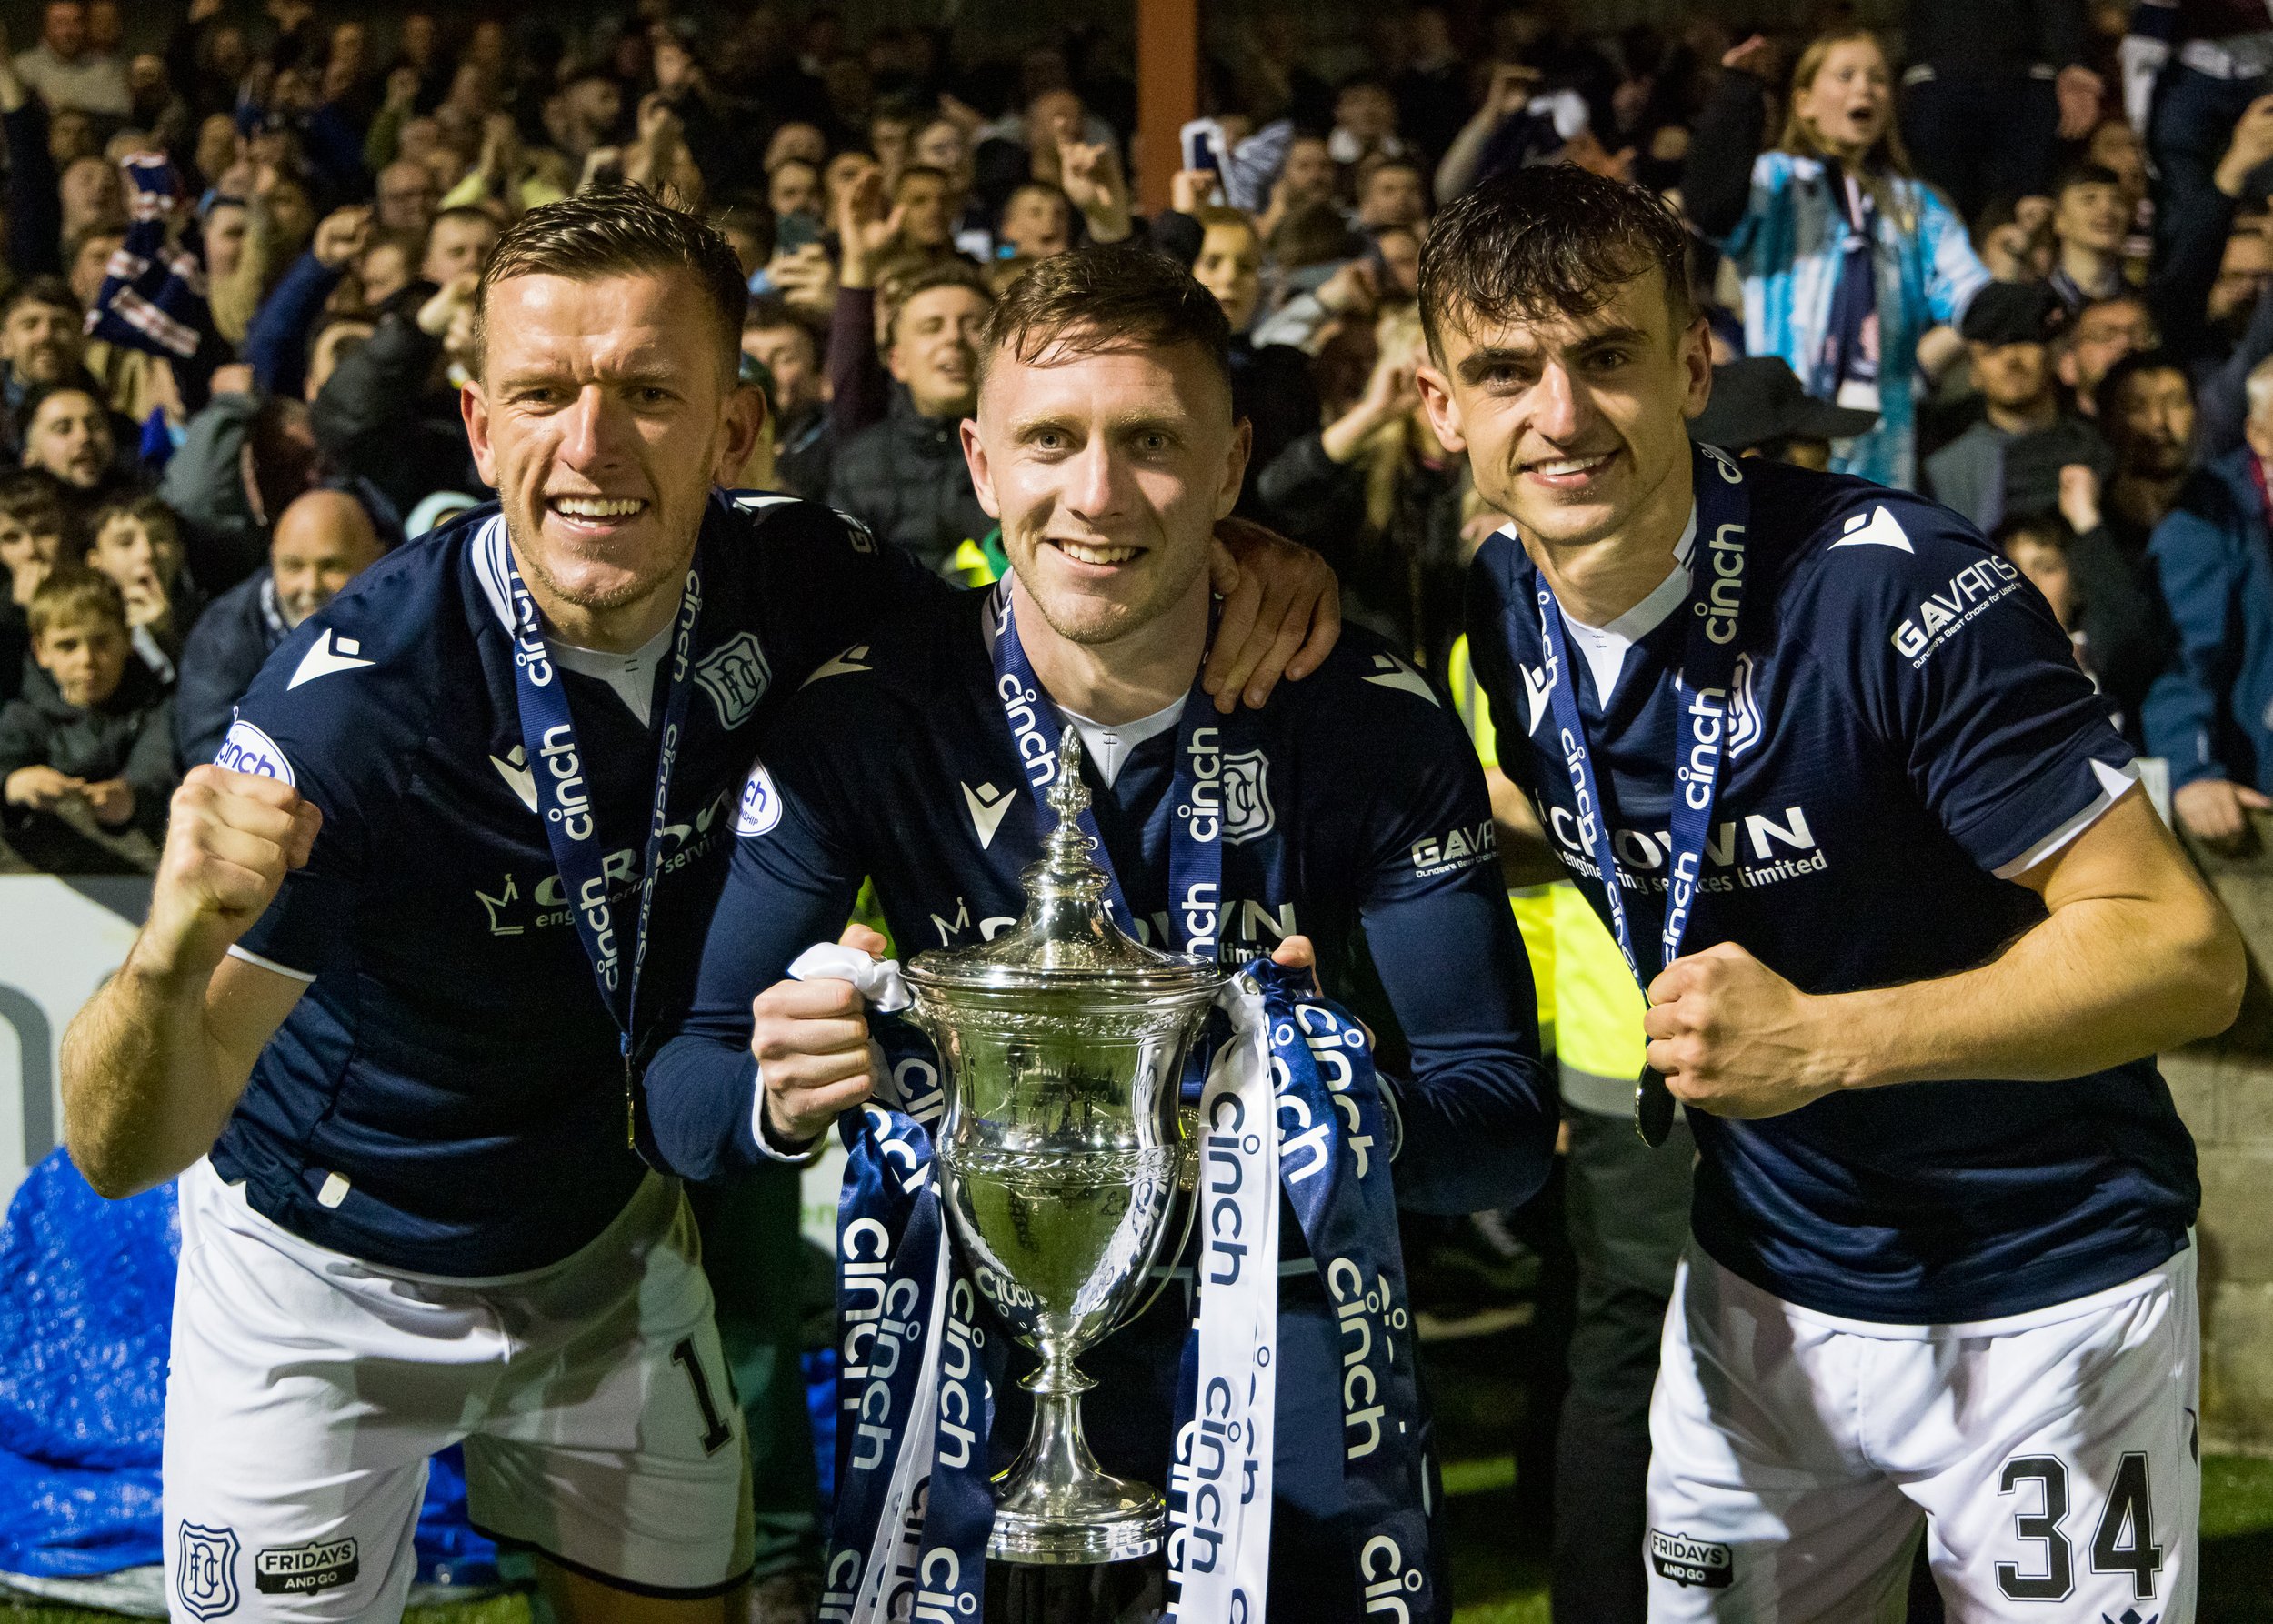  Dundee players with their medals and the championship trophy 